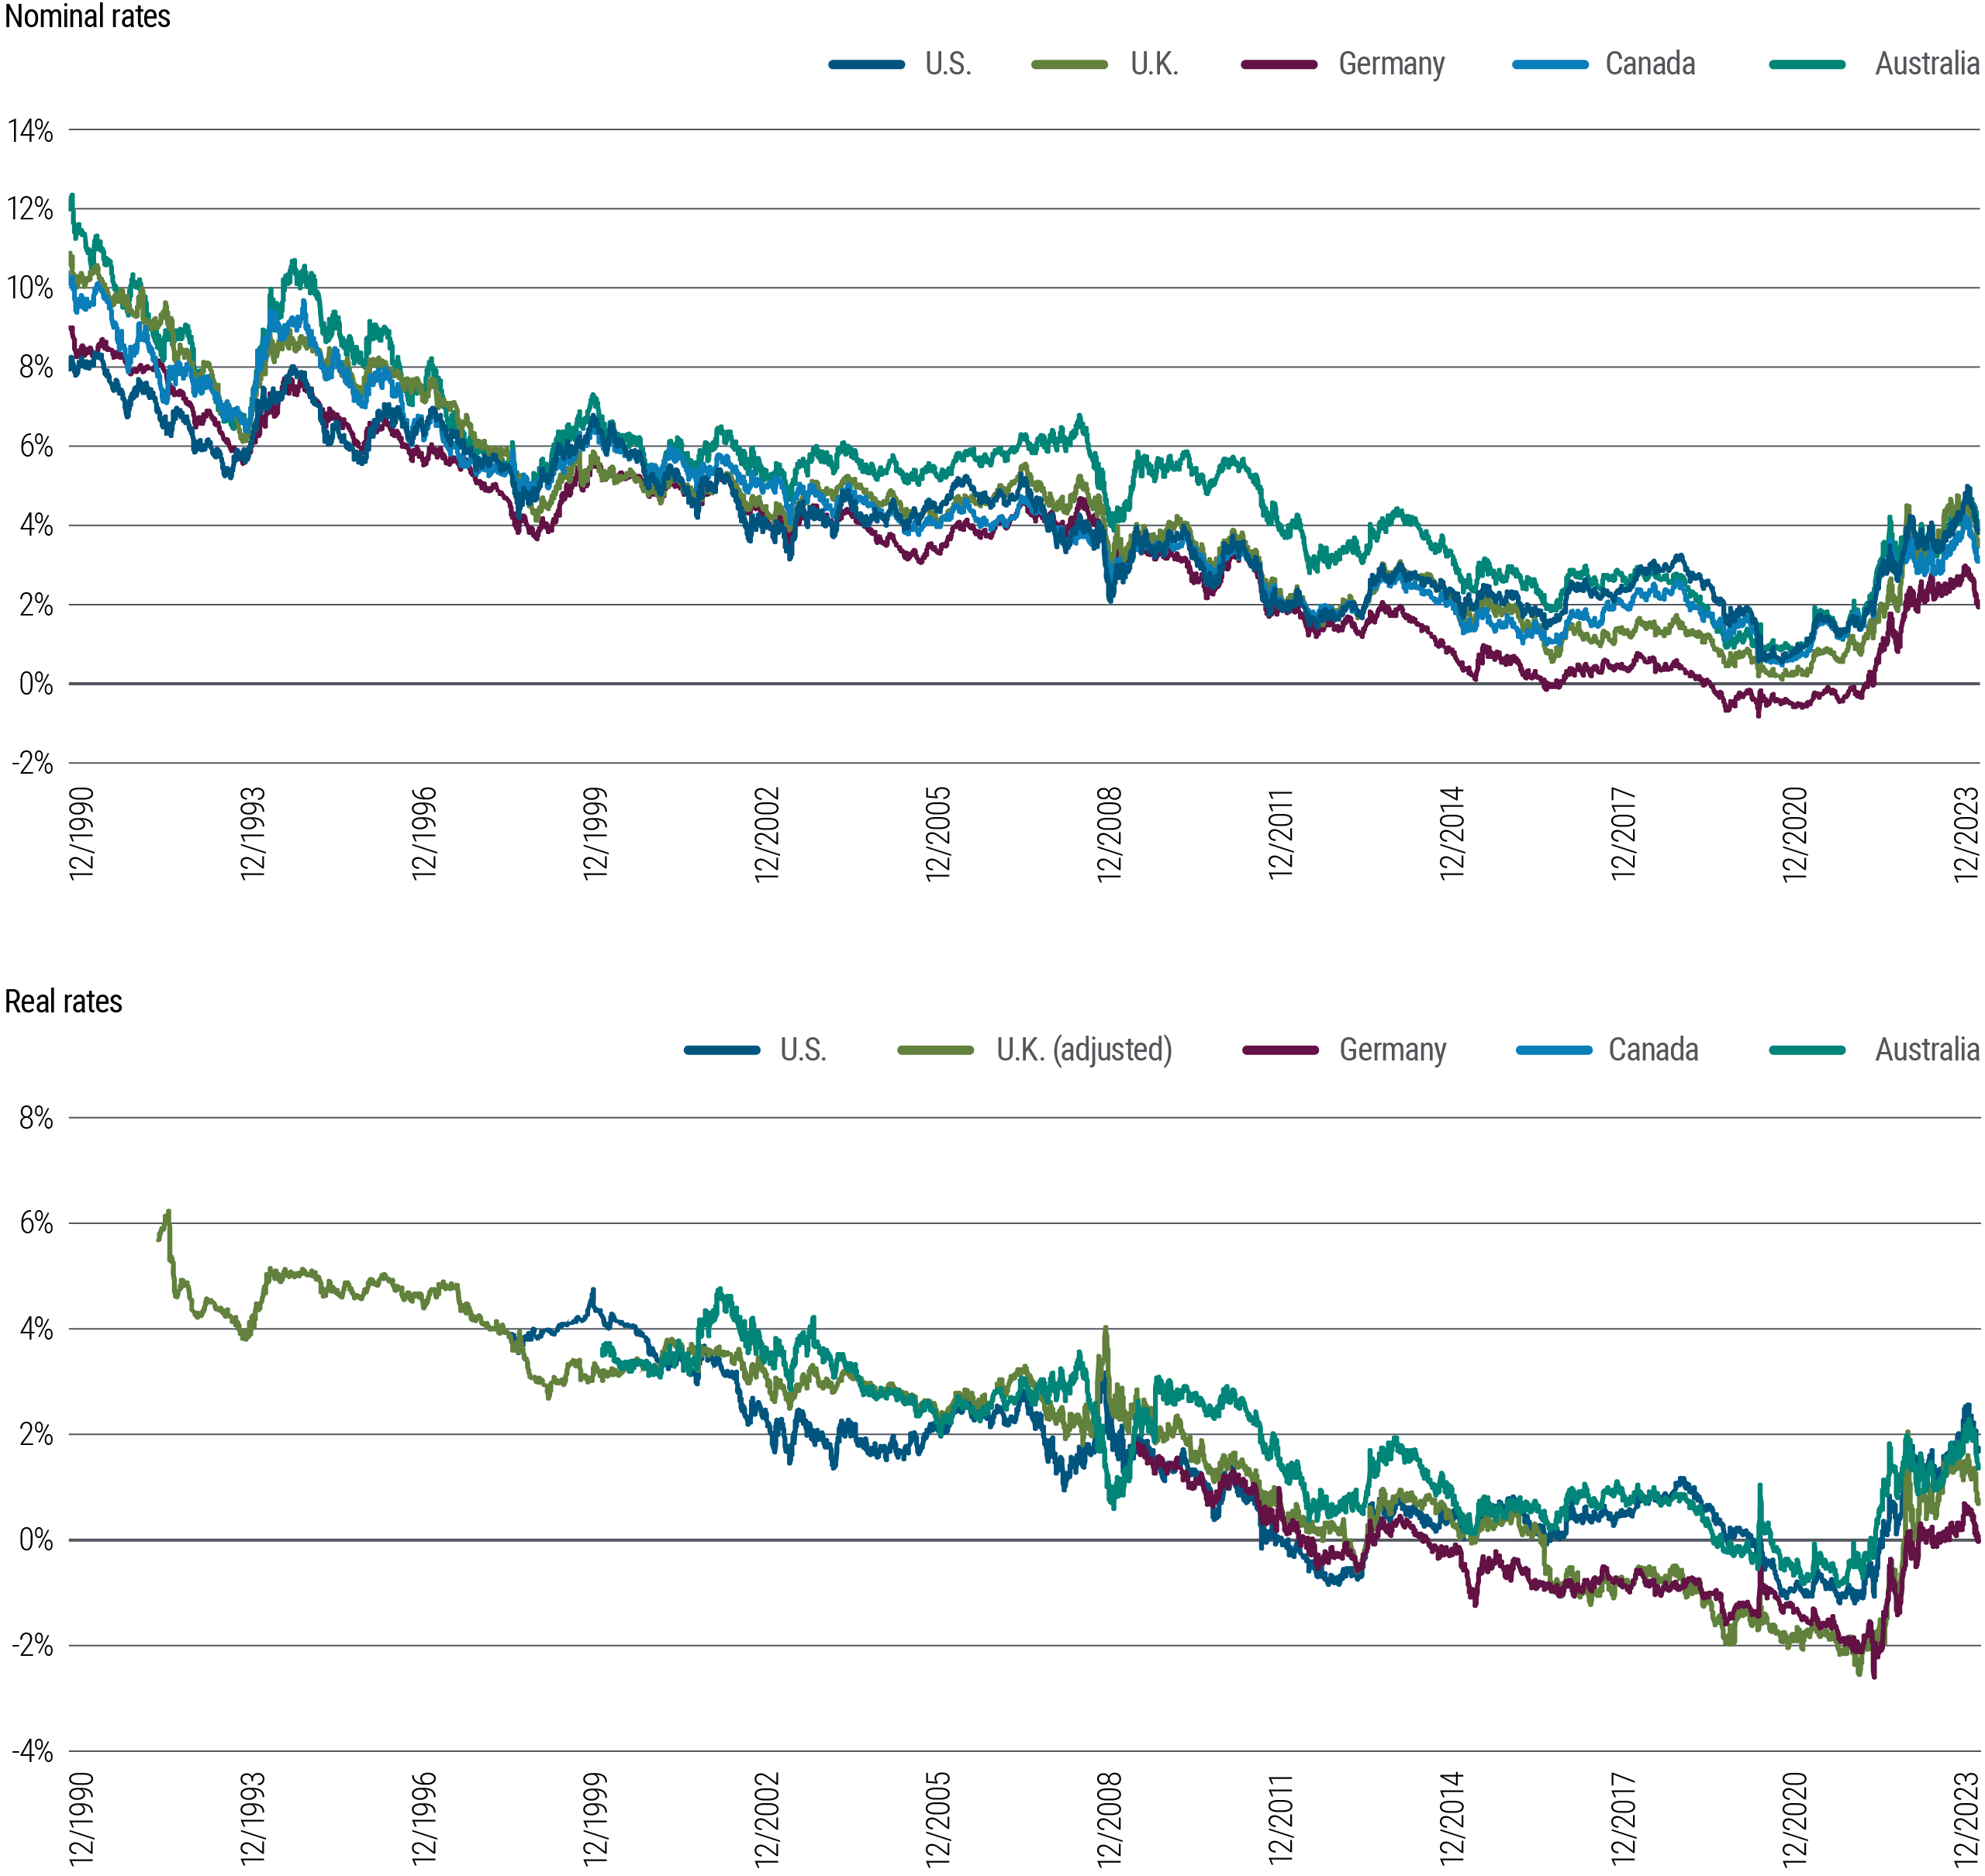 Figure 3 is two line charts. The first chart shows 10-year nominal interest rates in 5 developed market countries (U.S., U.K., Germany, Canada, and Australia) from 1990 through December 2023. In that time frame, nominal yields fluctuated some but along a downward trend from about 9%–14% in 1990 to a low hovering around zero in 2020, around the pandemic. They have since risen into a range from about 2% to just below 4%. The second chart shows 10-year real rates for the same countries over the same time frame. Real rates generally and gradually dropped for much of that period, then rose rapidly following the pandemic, slowing those gains more recently but still off their lows and in a range of 0.1%–1.7%. Data source is PIMCO and Bloomberg as of 29 December 2023.